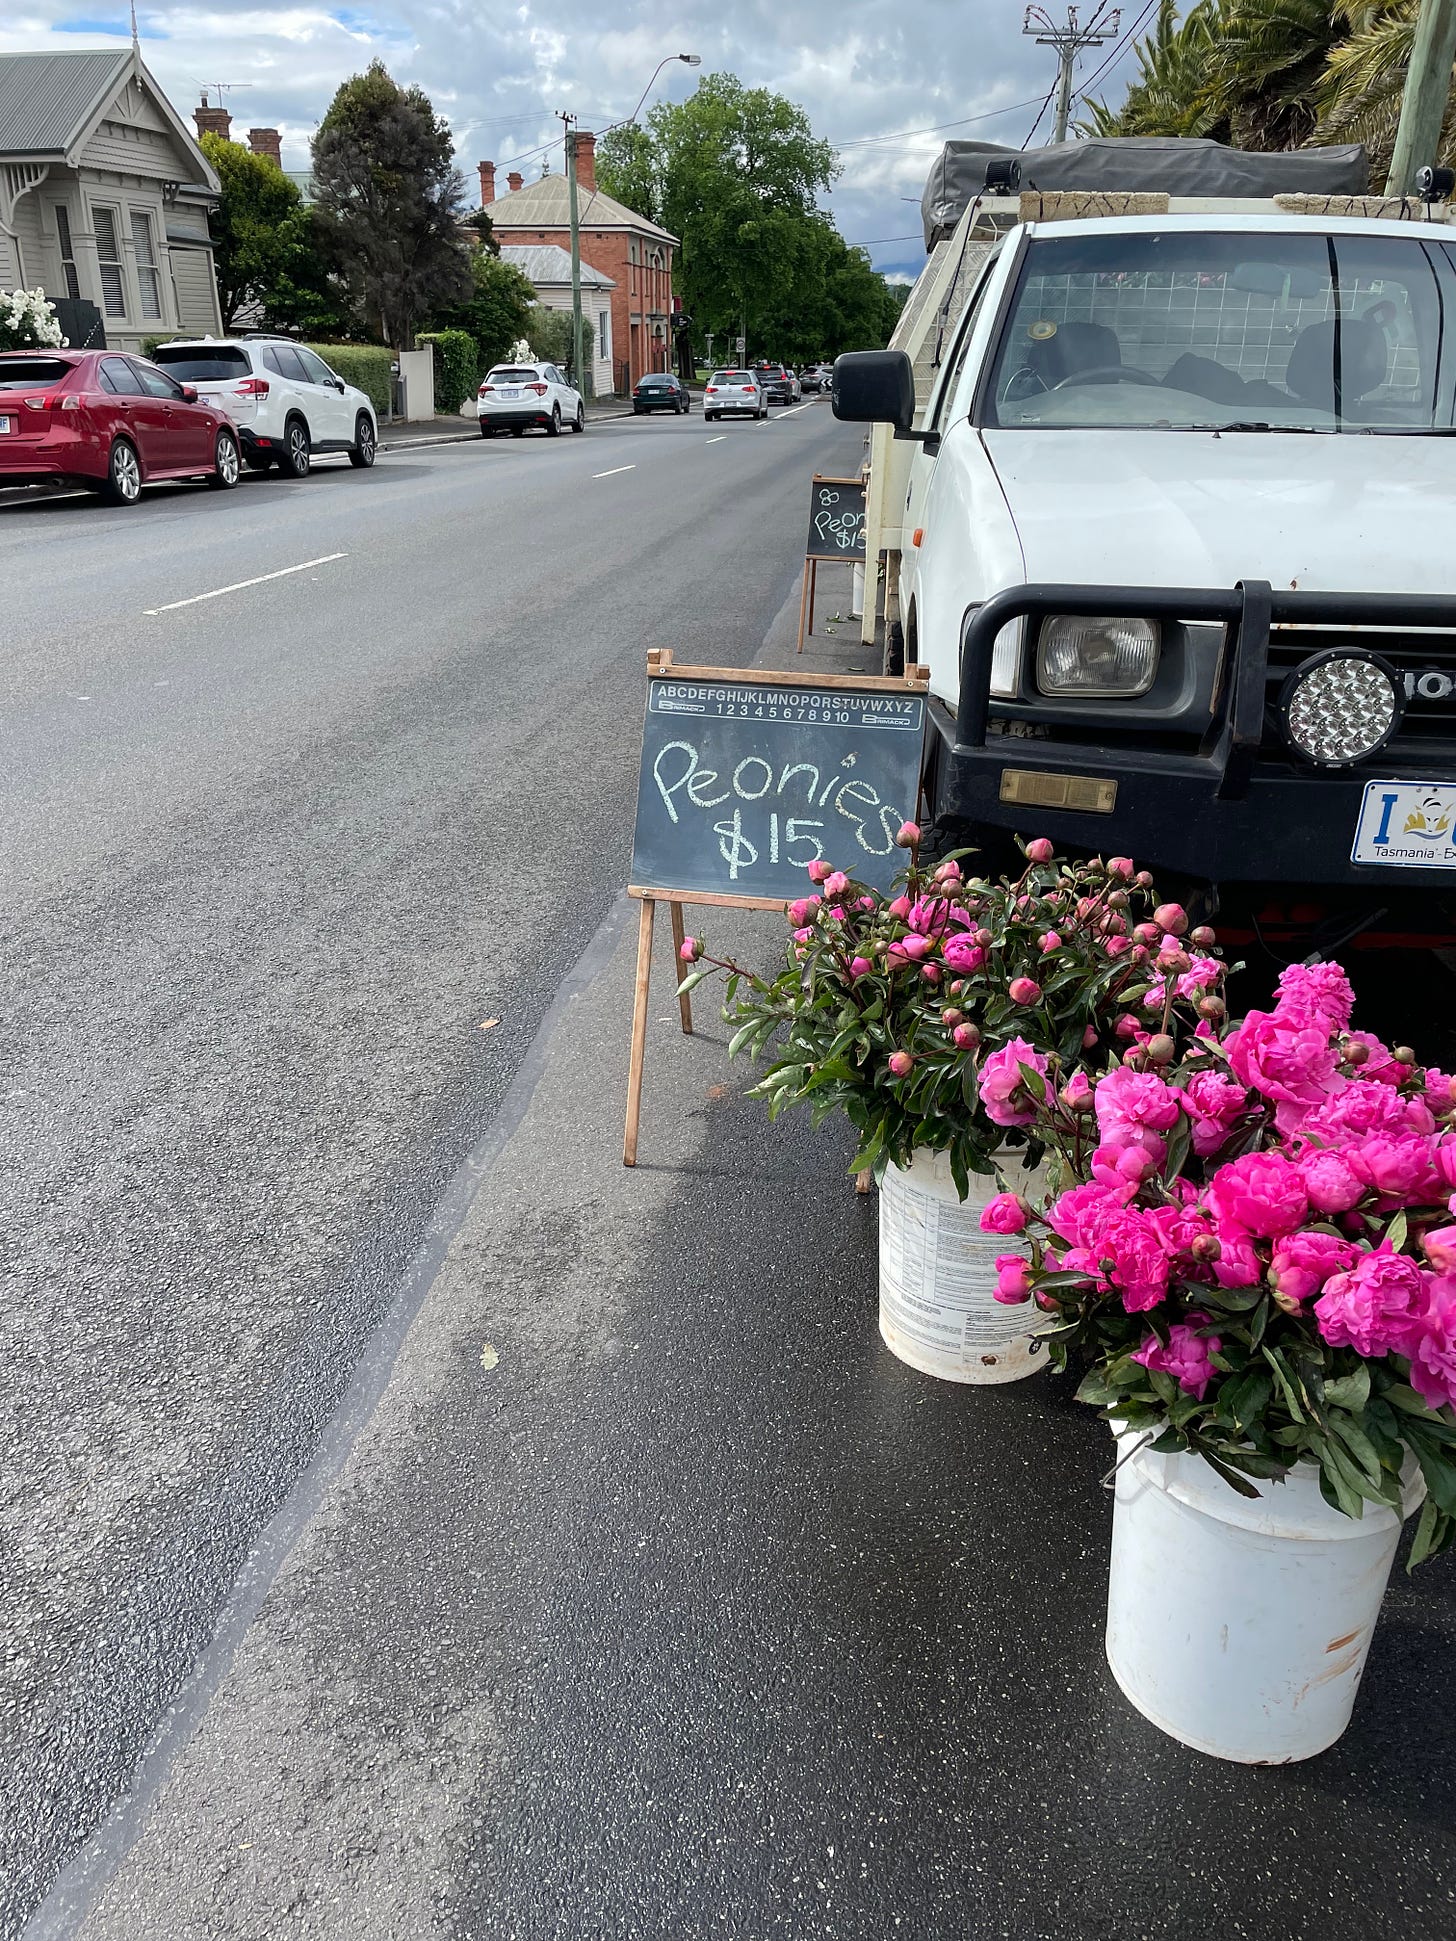 Road side peony stand